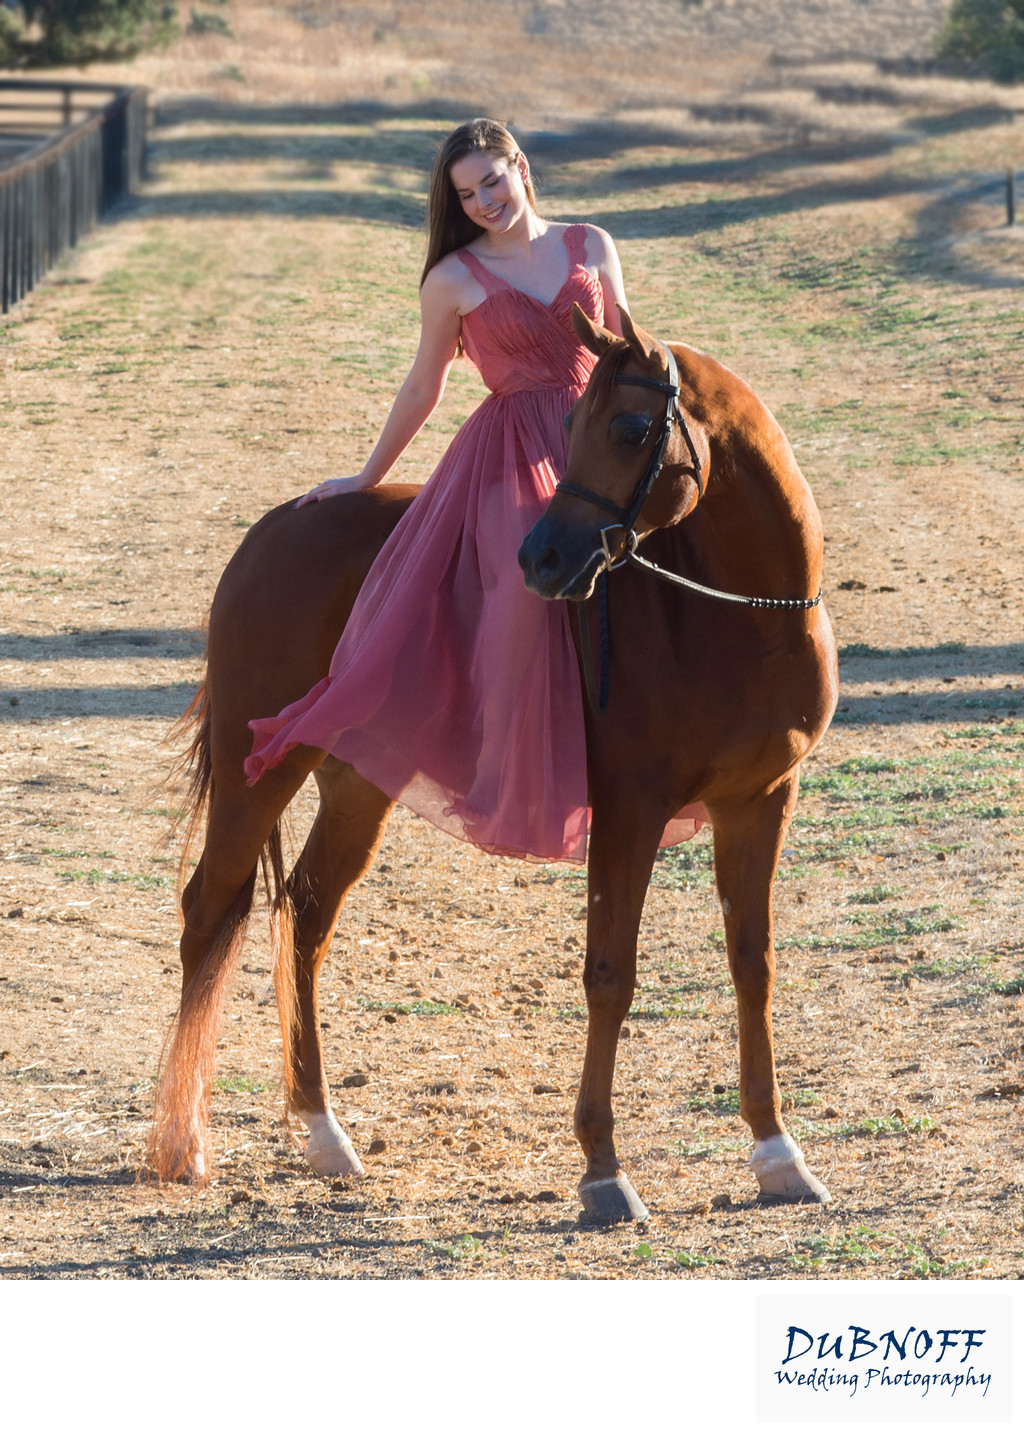 Equine Photography Portrait Session for a High School Senior in Dress